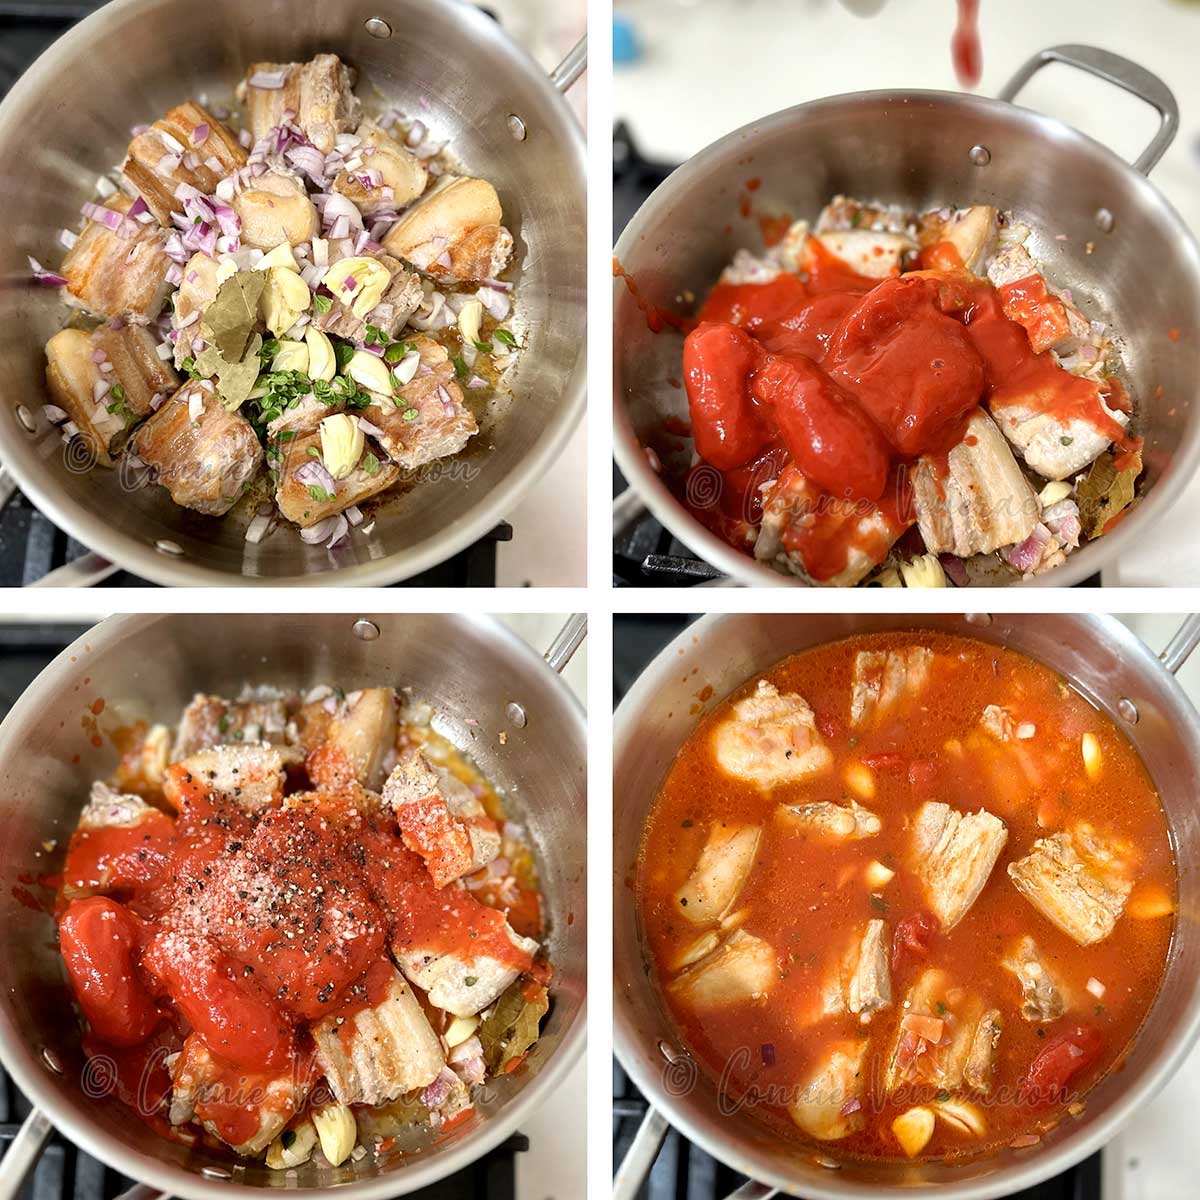 Adding spices, herbs, seasonings and tomato sauce to browned pork belly cubes